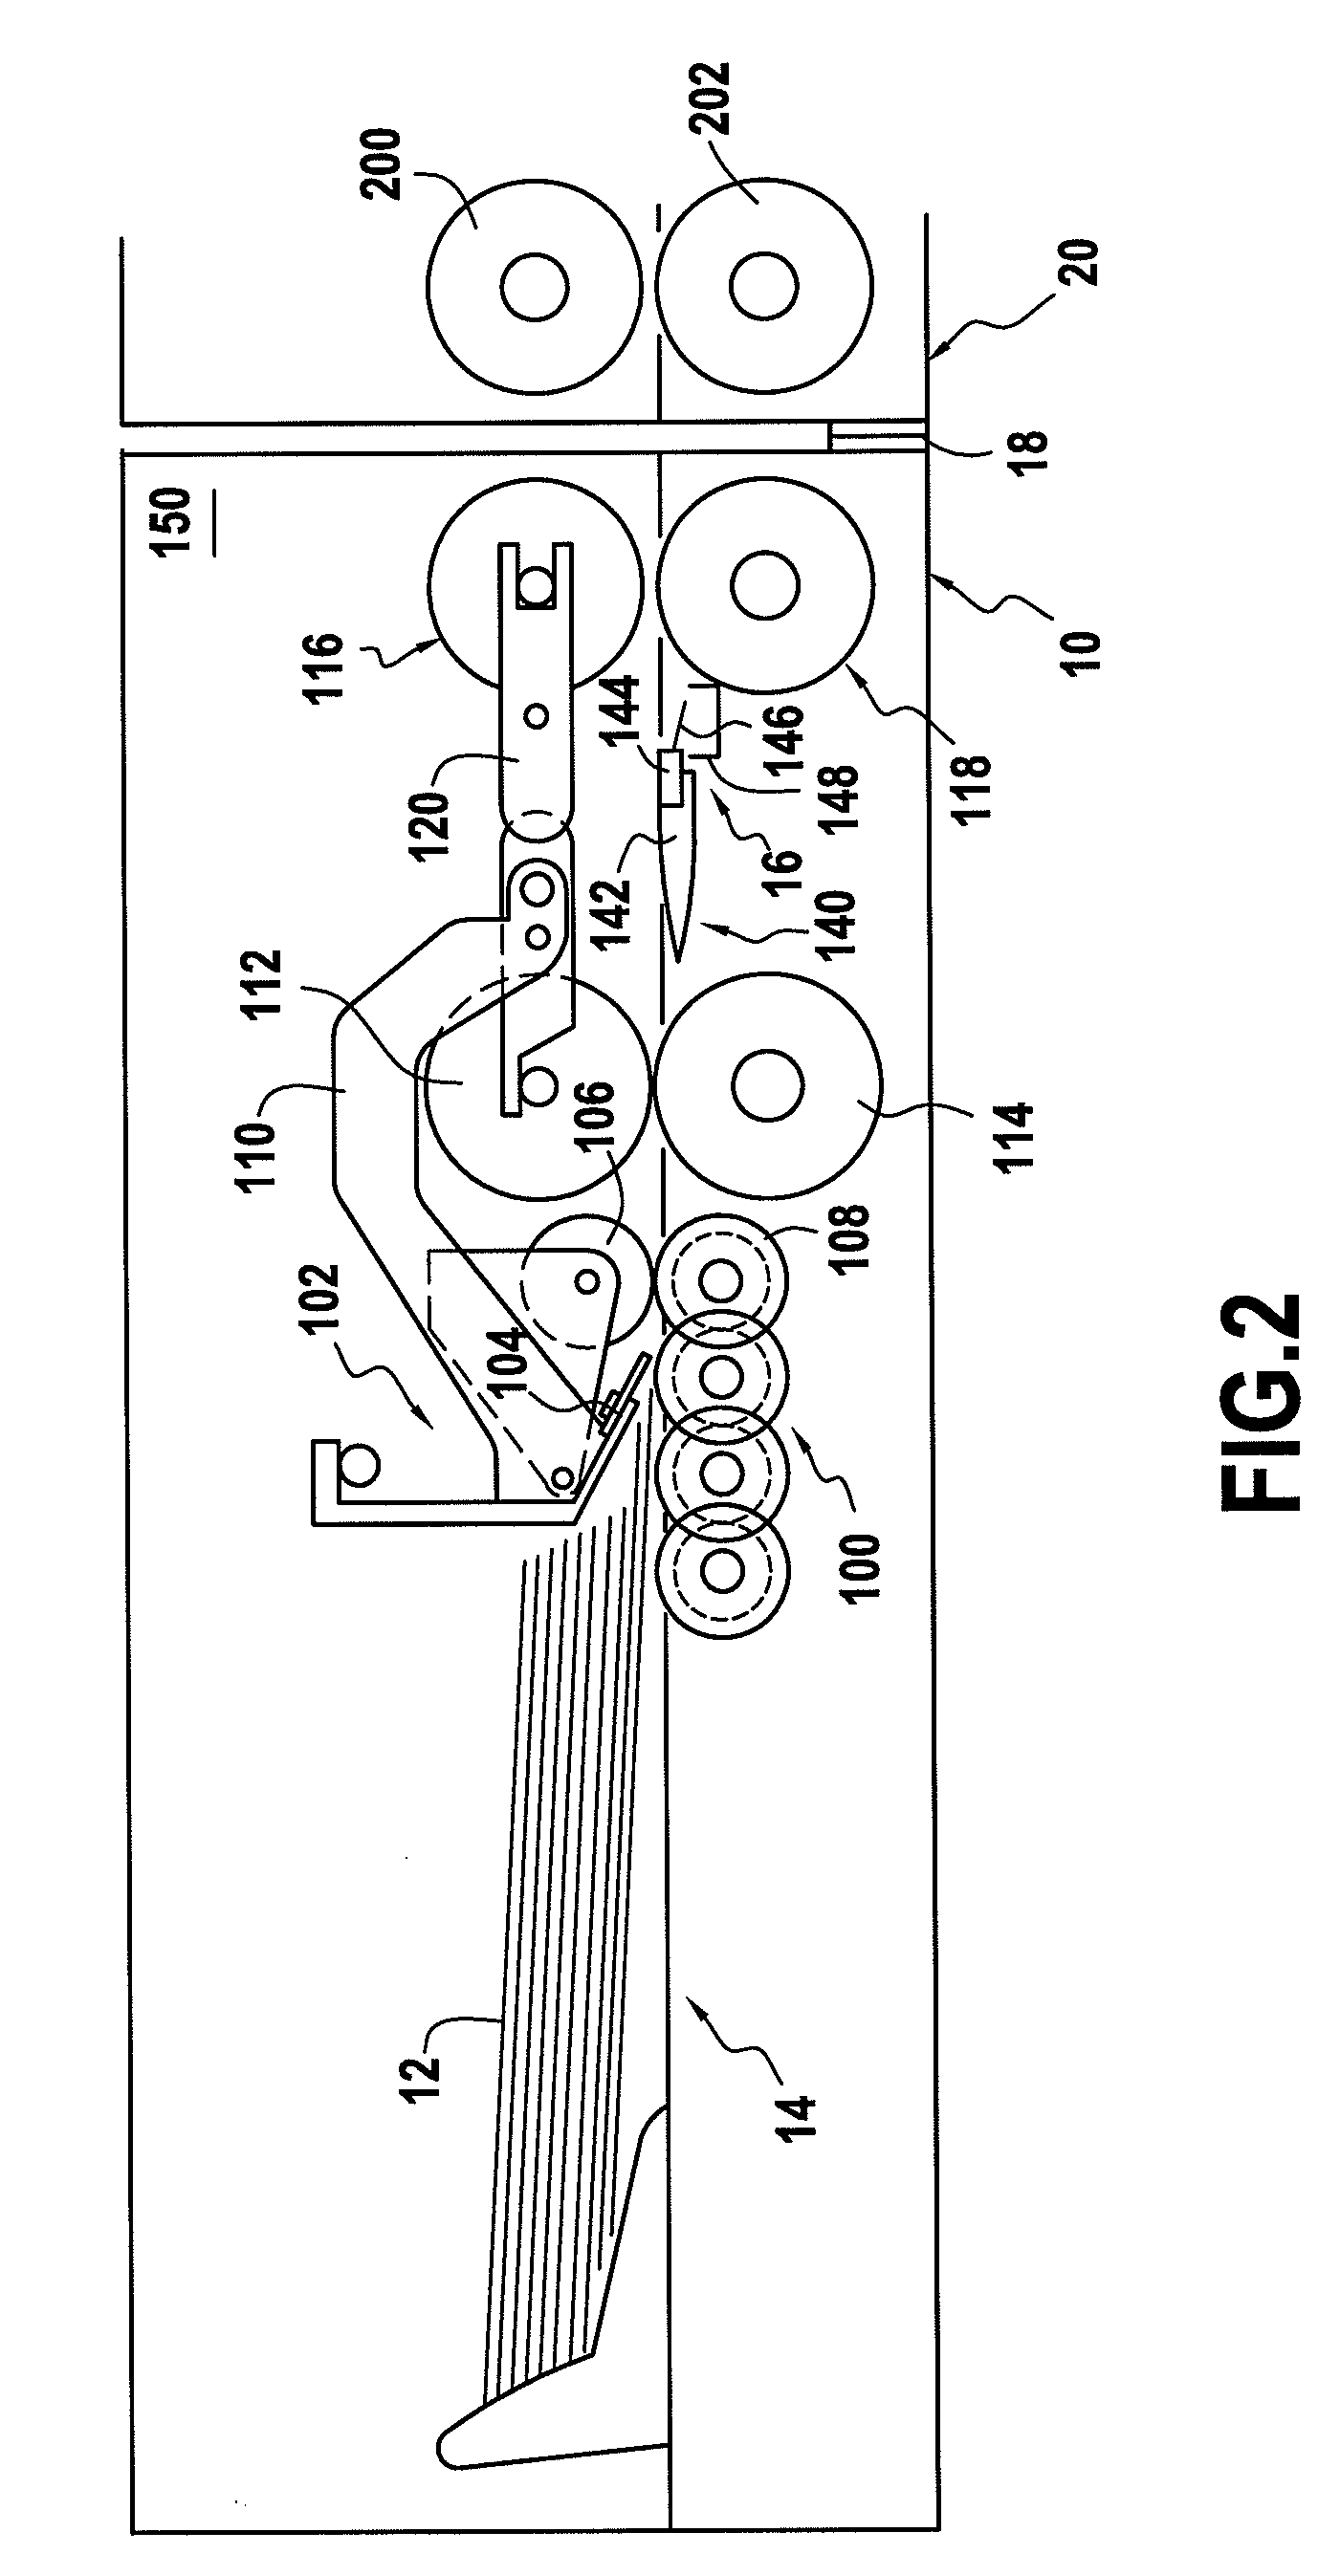 Feed module including an envelope closure device that retains water